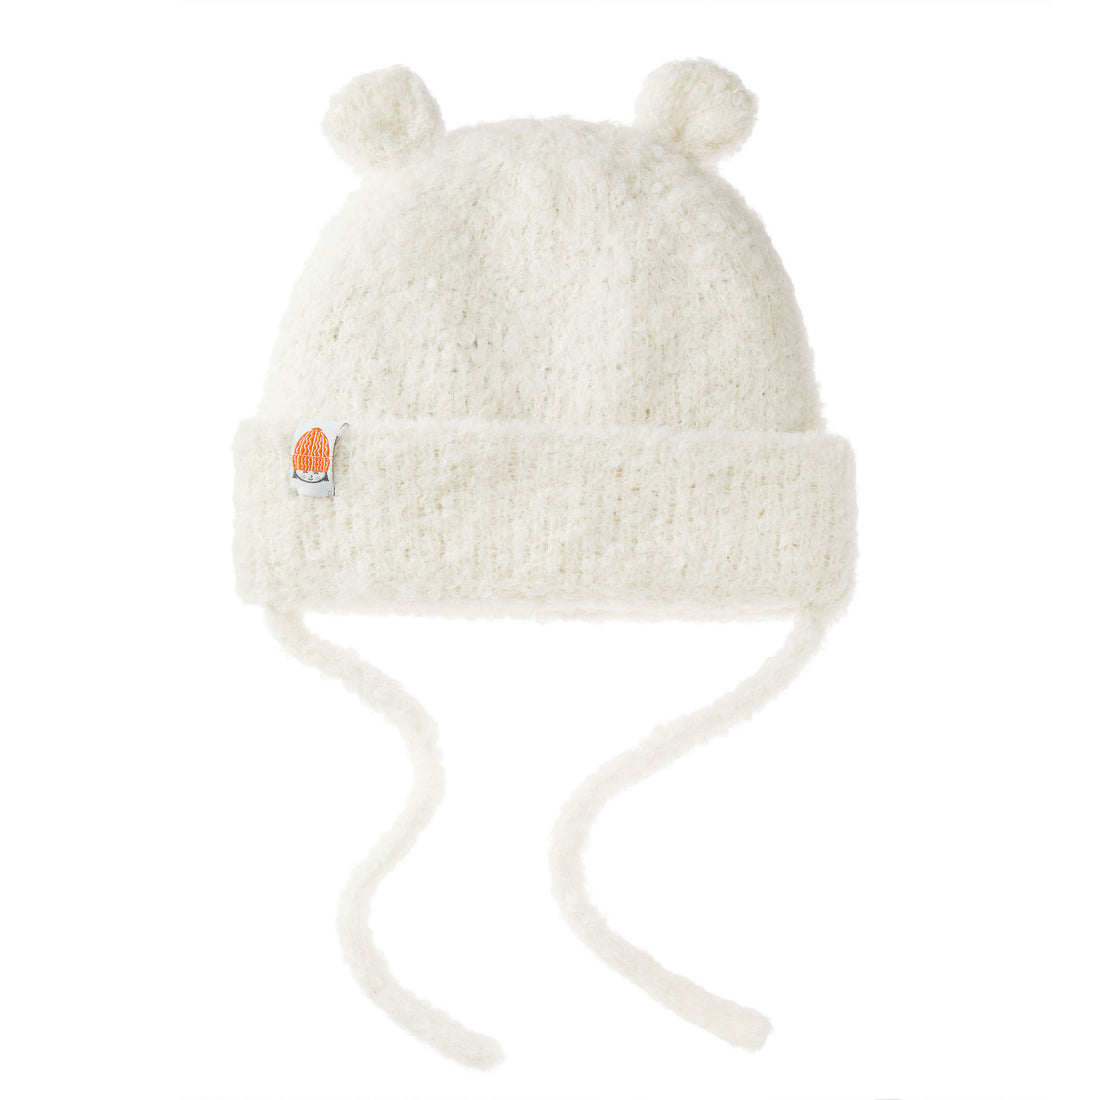 The Toddler Lil Teddy Beanie